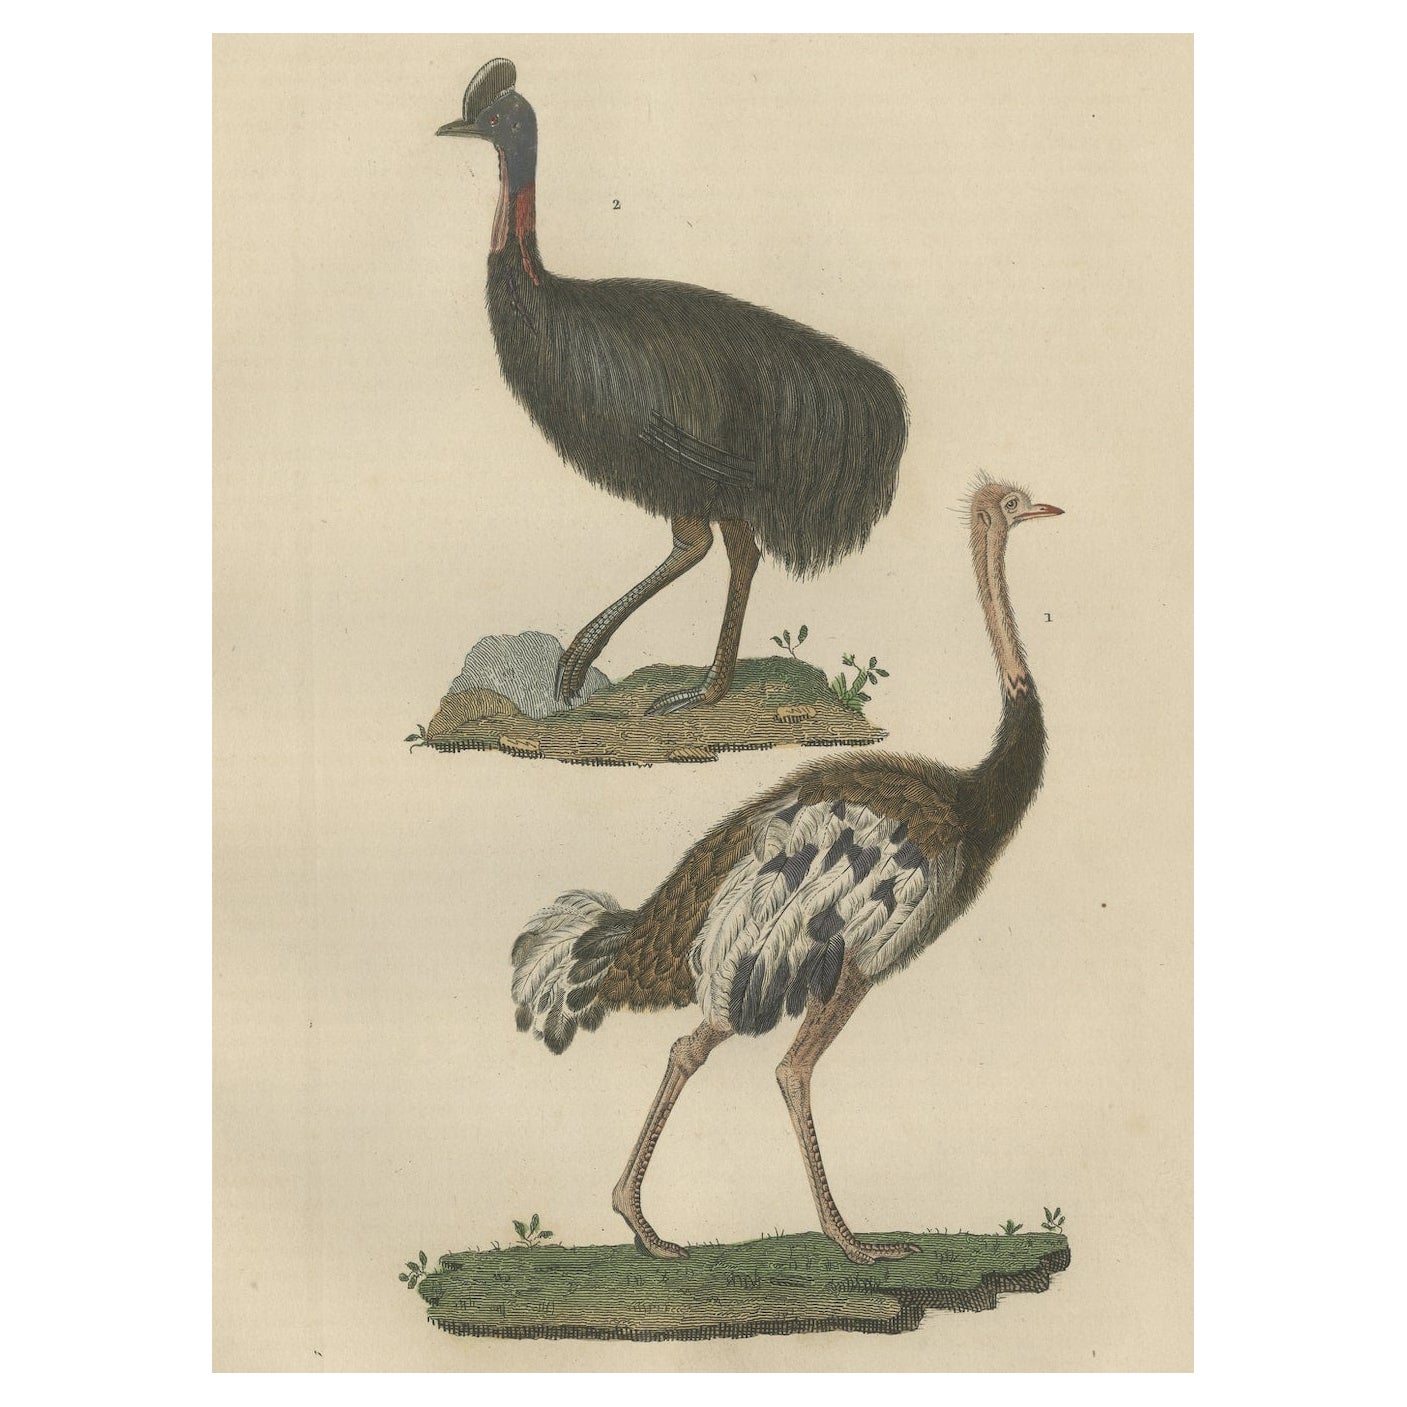 Decorative Old Hand-Colored Bird Print of an Ostrich and Cassowary